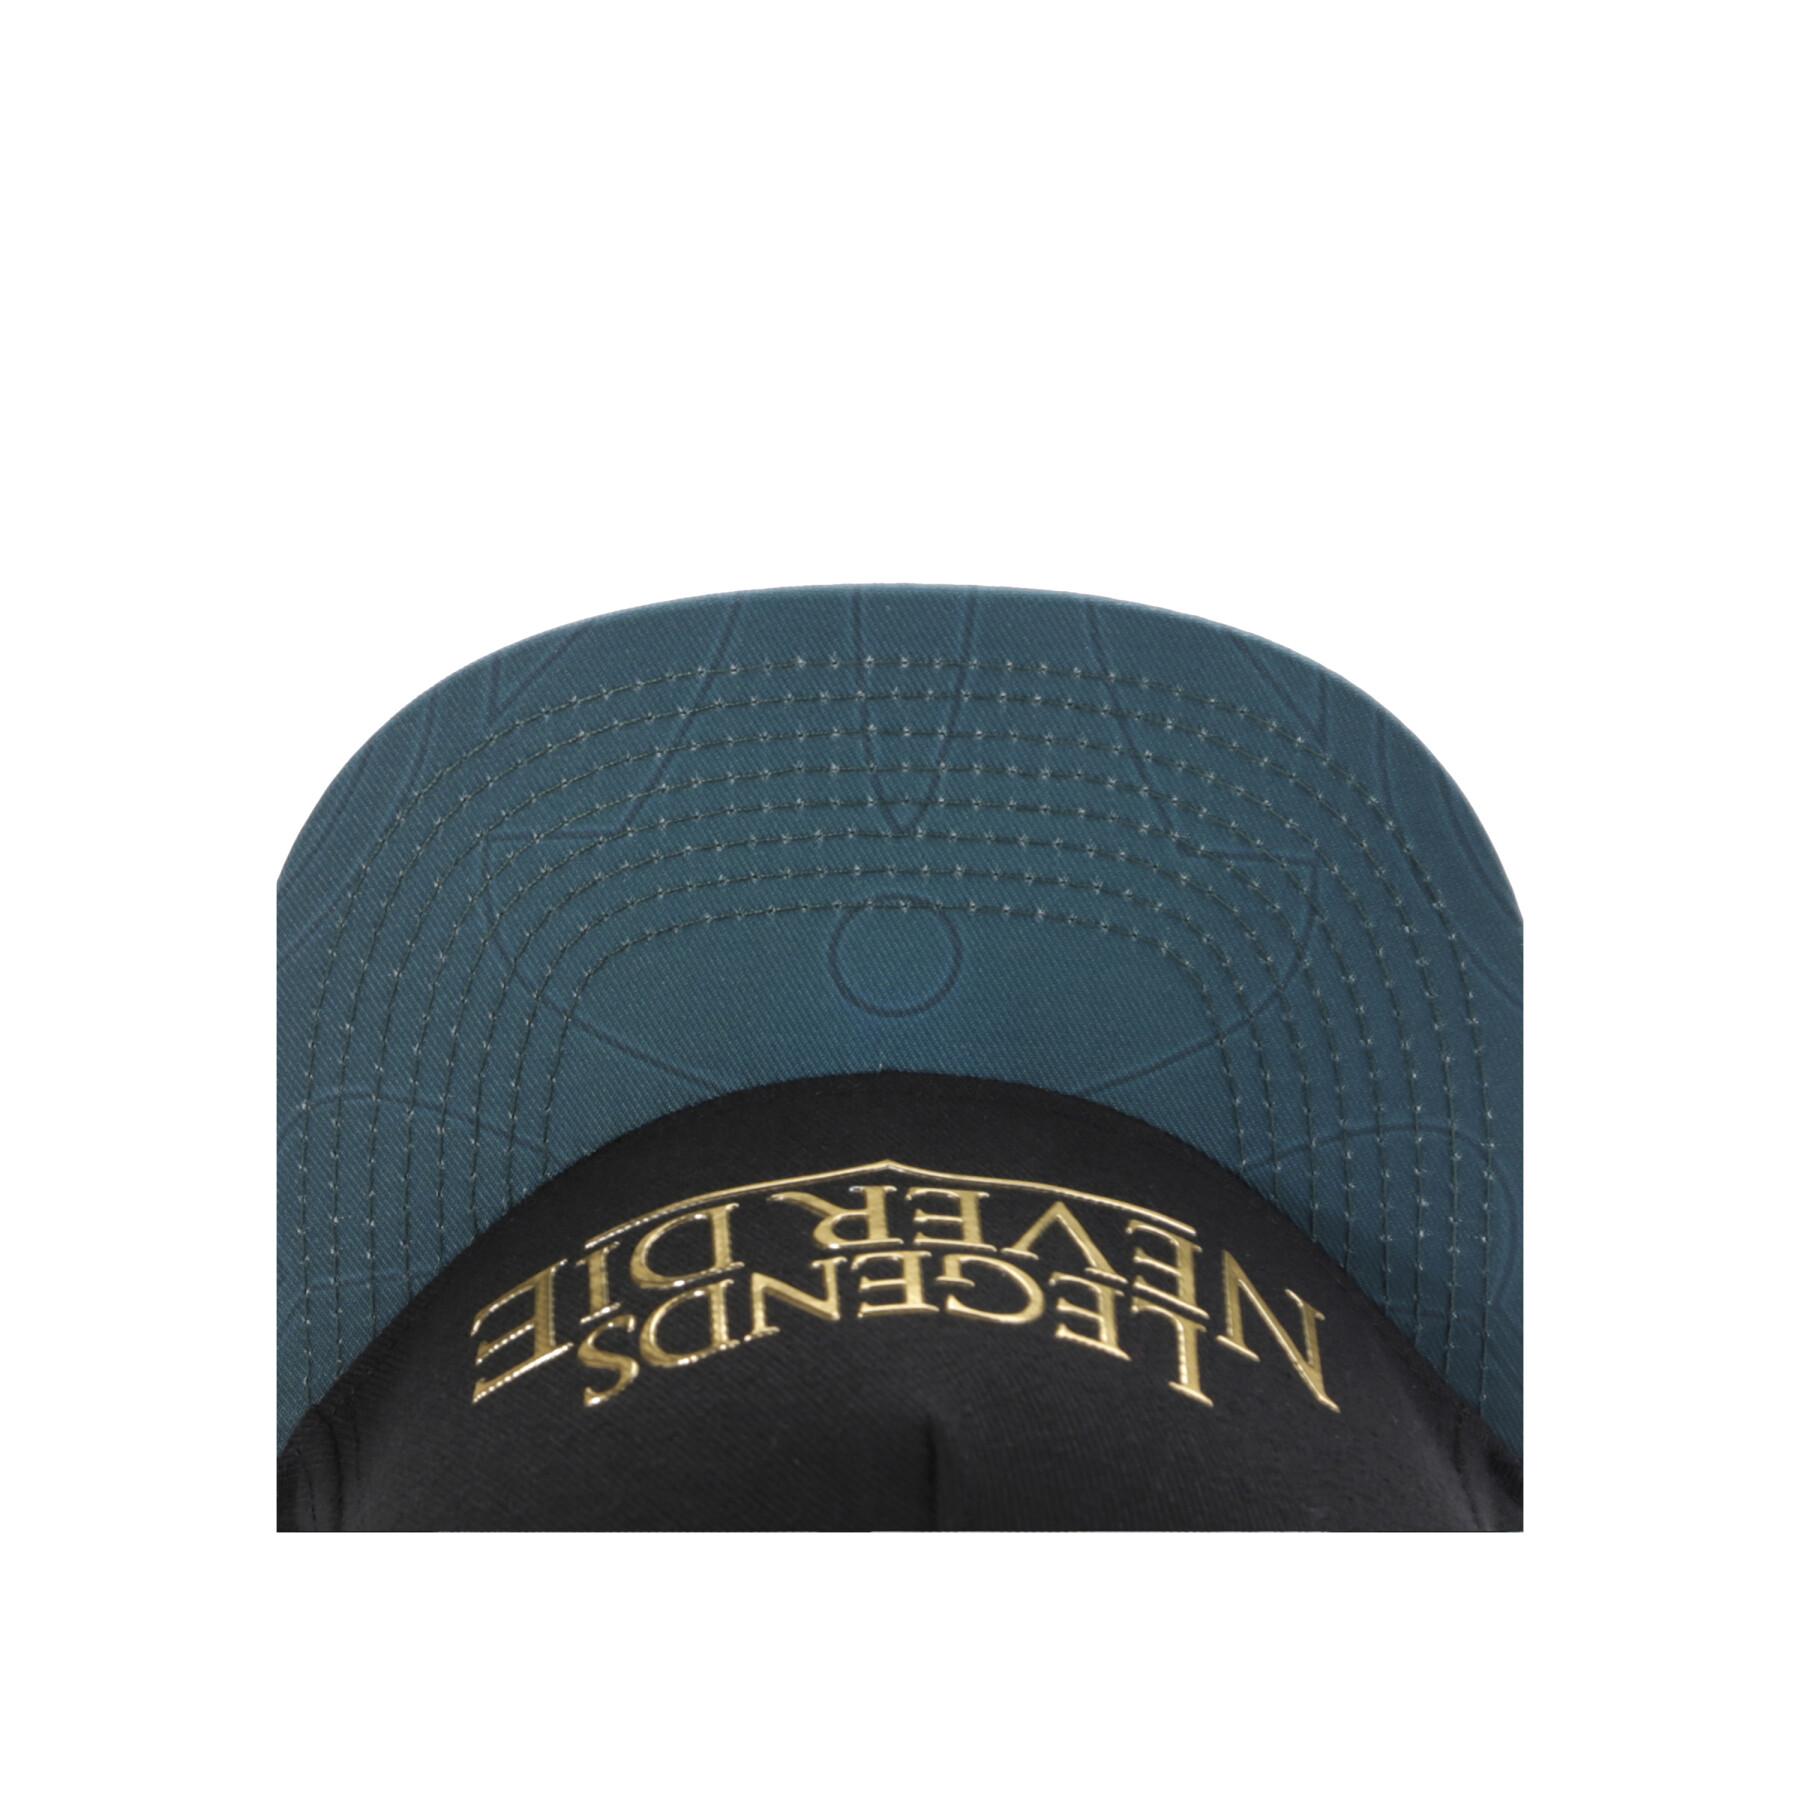 Casquette Hand of Gold end